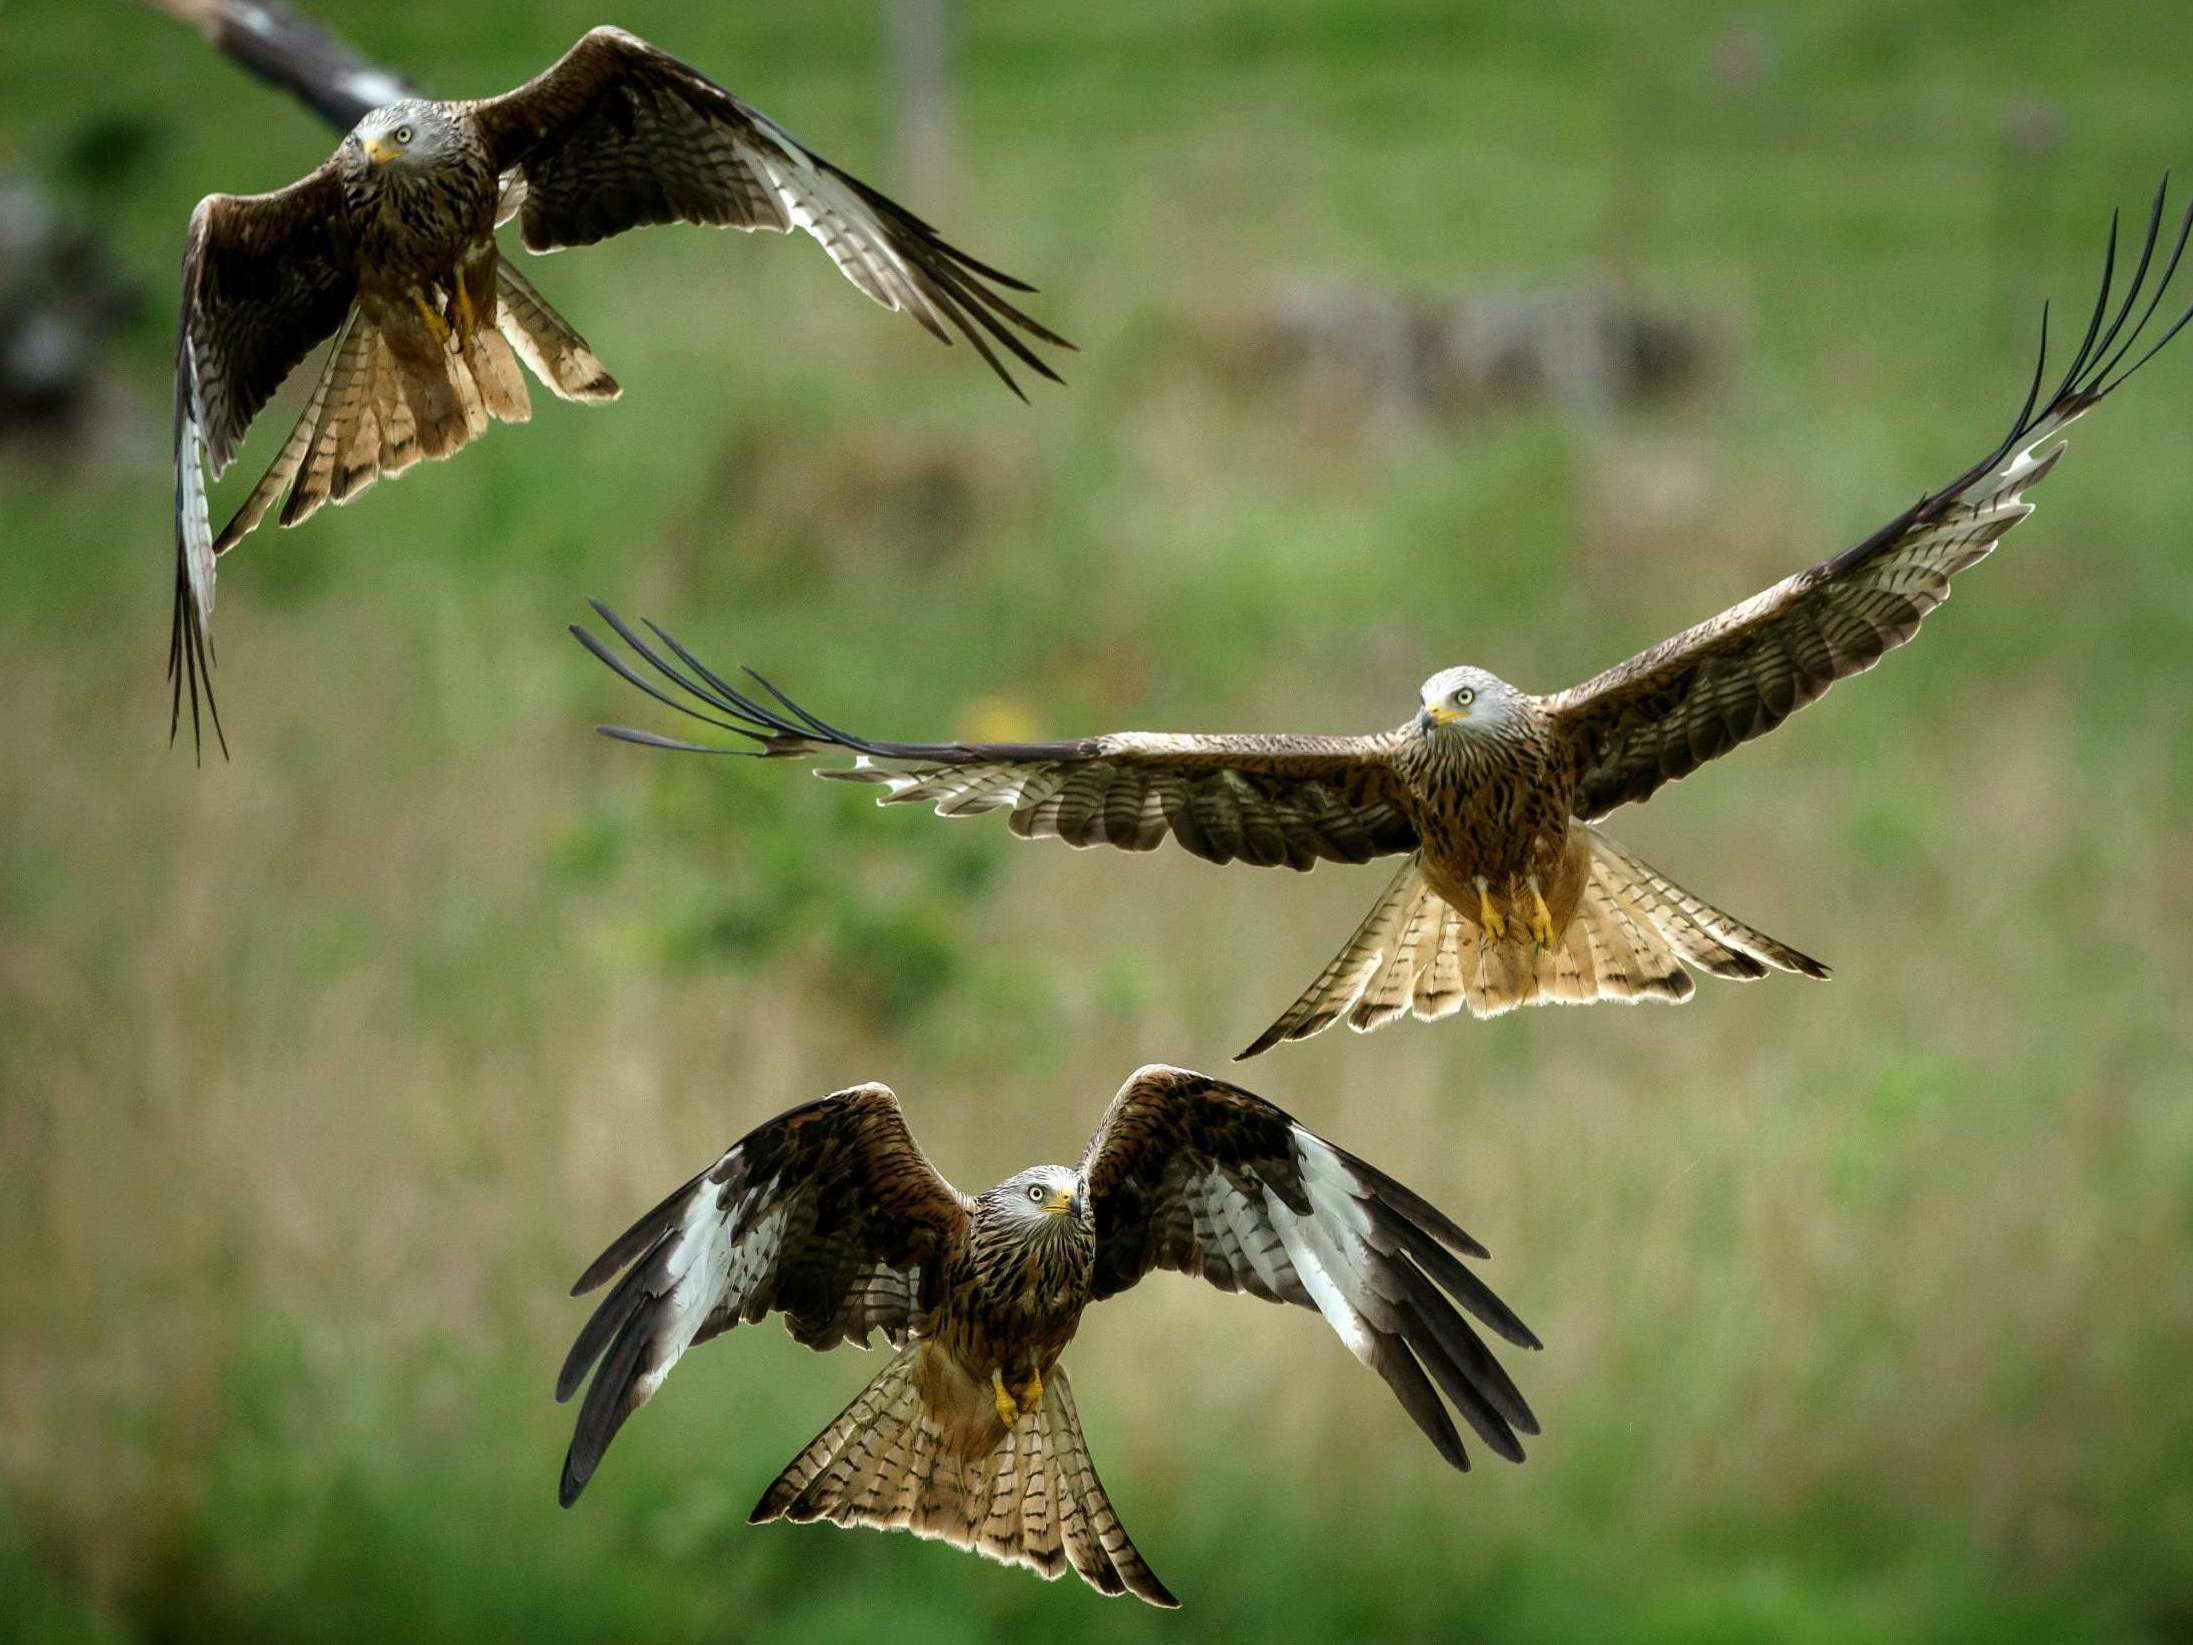 Red kite reintroduction 'might be biggest species success story in UK conservation history'